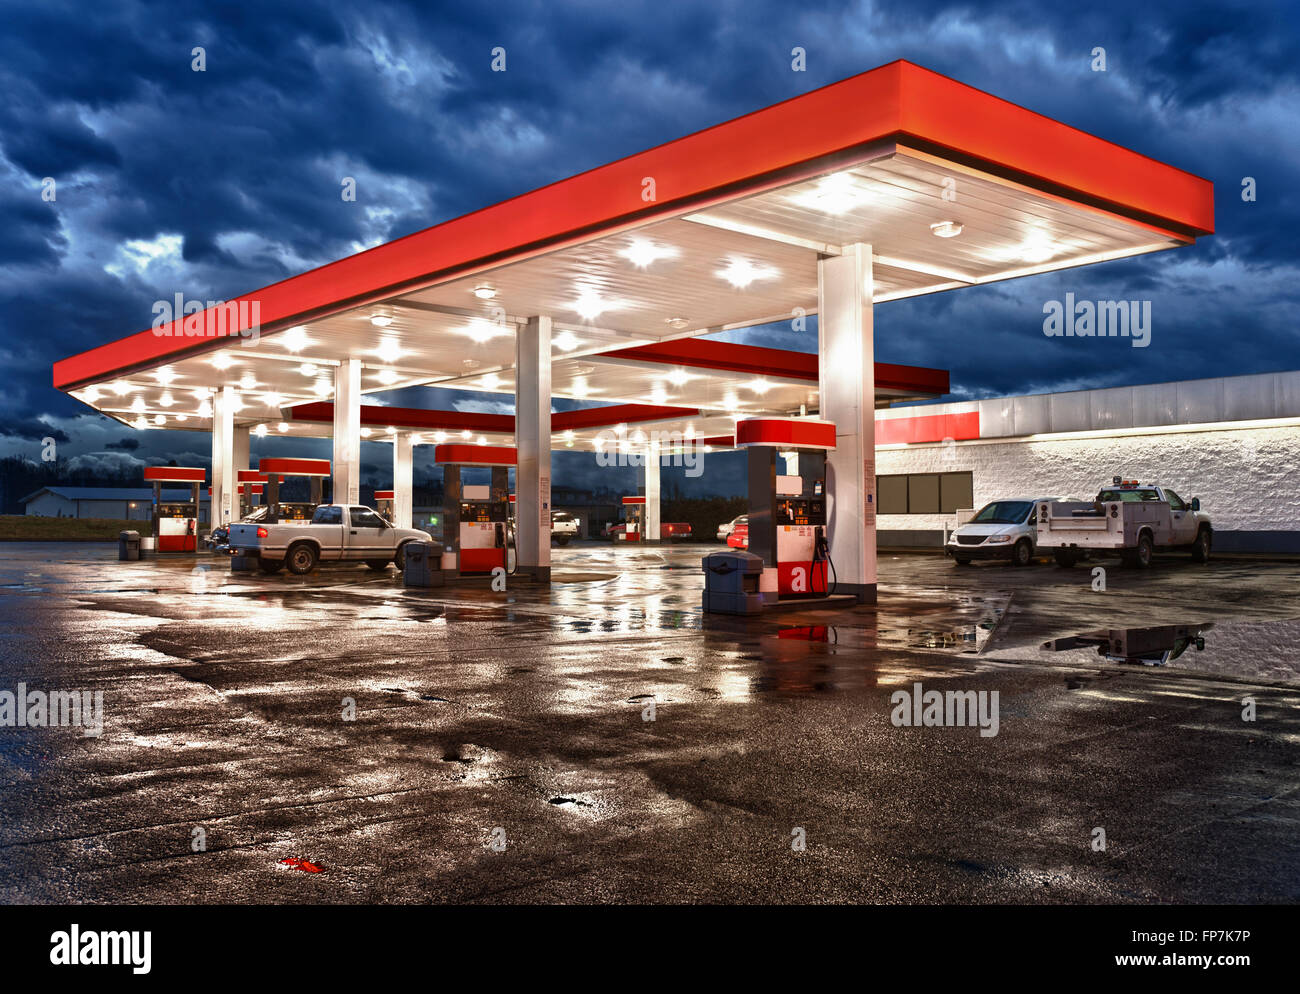 Gas Station Convenience Store On Rainy Evening Stock Photo